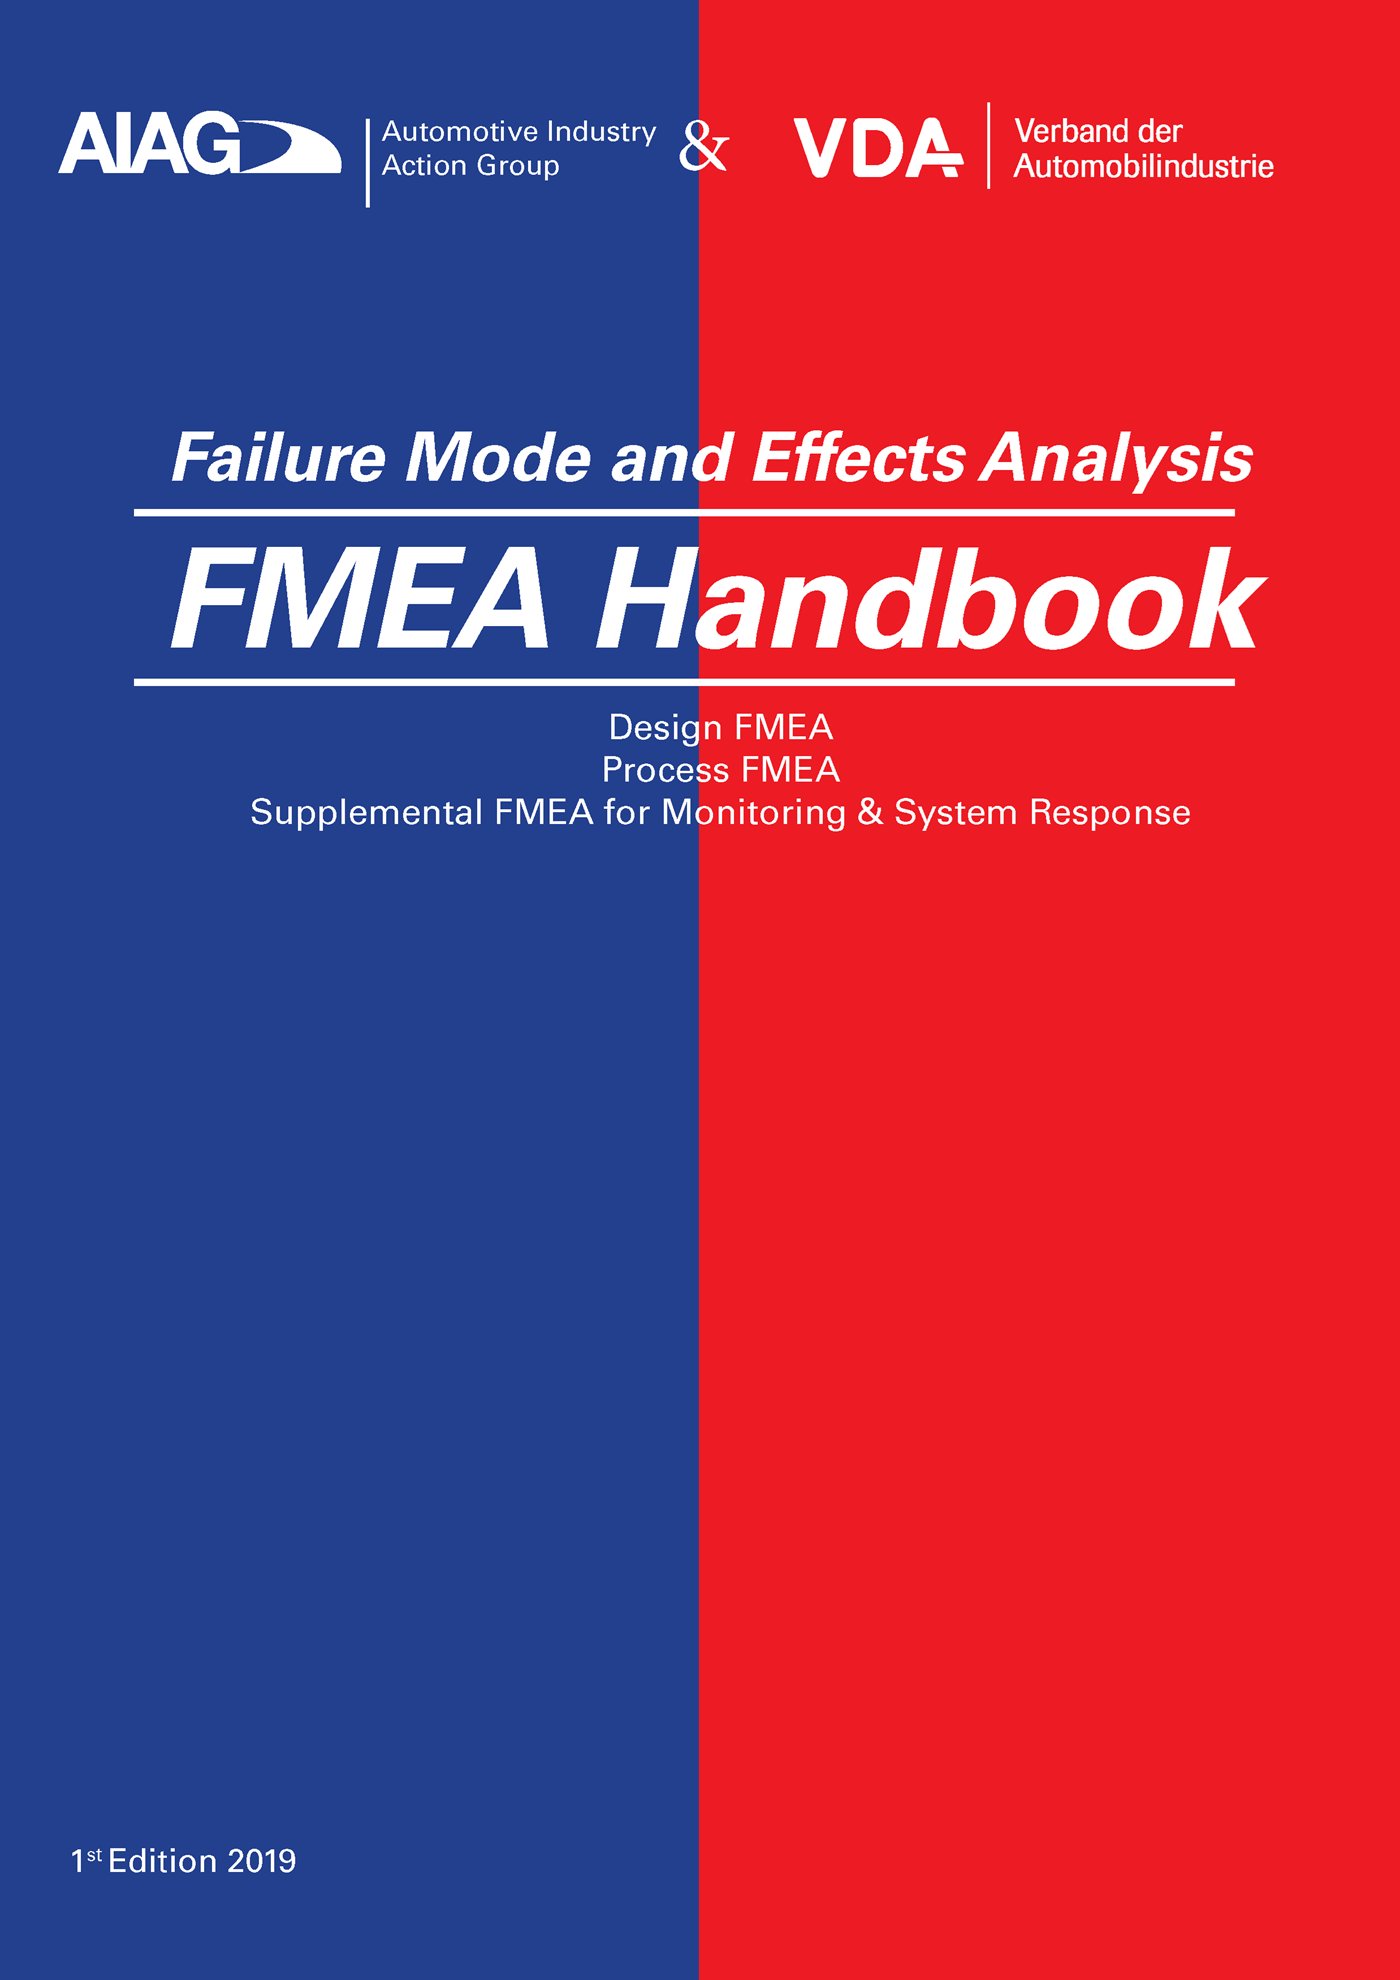 Publications  VDA AIAG & VDA FMEA-Handbook
 Design FMEA, Process FMEA, 
 Supplemental FMEA for Monitoring & System Response
 First Edition Issued June 2019 1.1.2019 preview